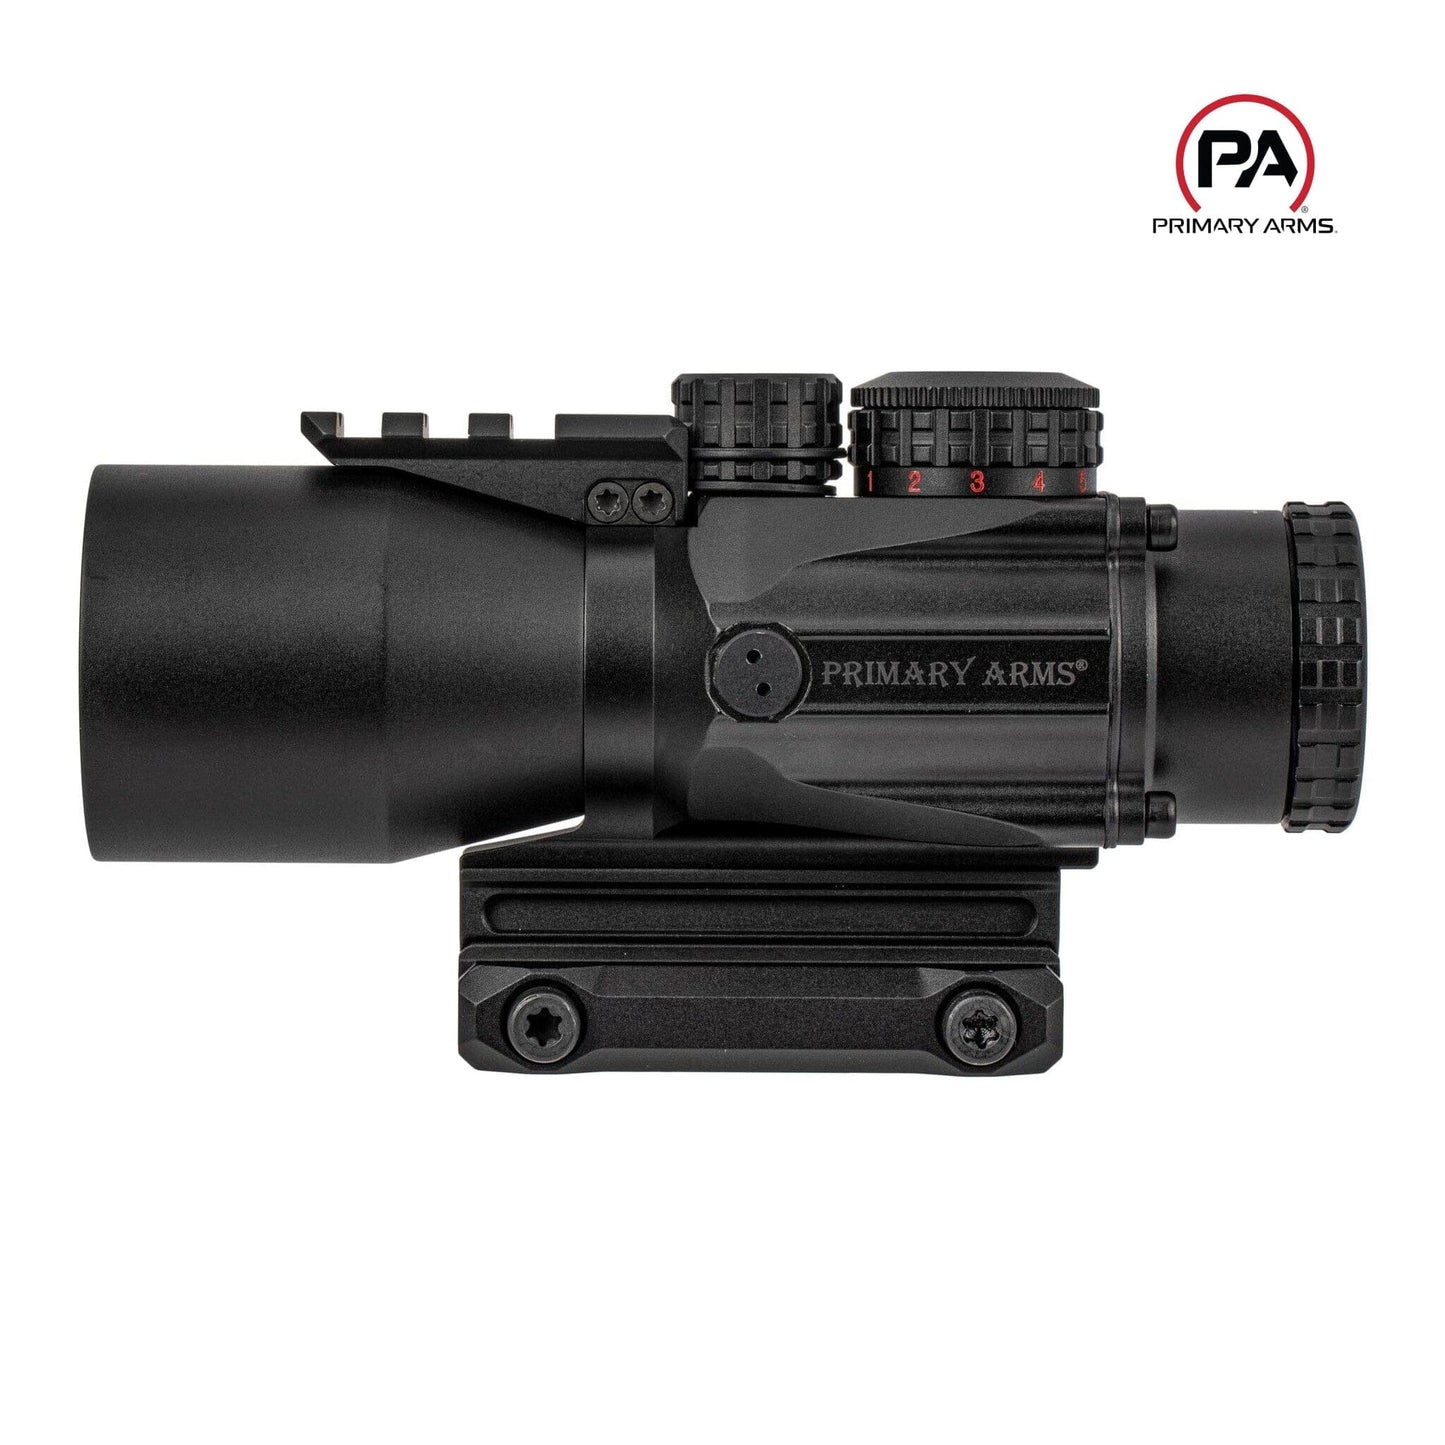 Primary Arms SLx 5x36mm Prism Scope Gen III - ACSS 5.56/5.45/.308 Reticle Prism Rifle Scope Primary Arms 